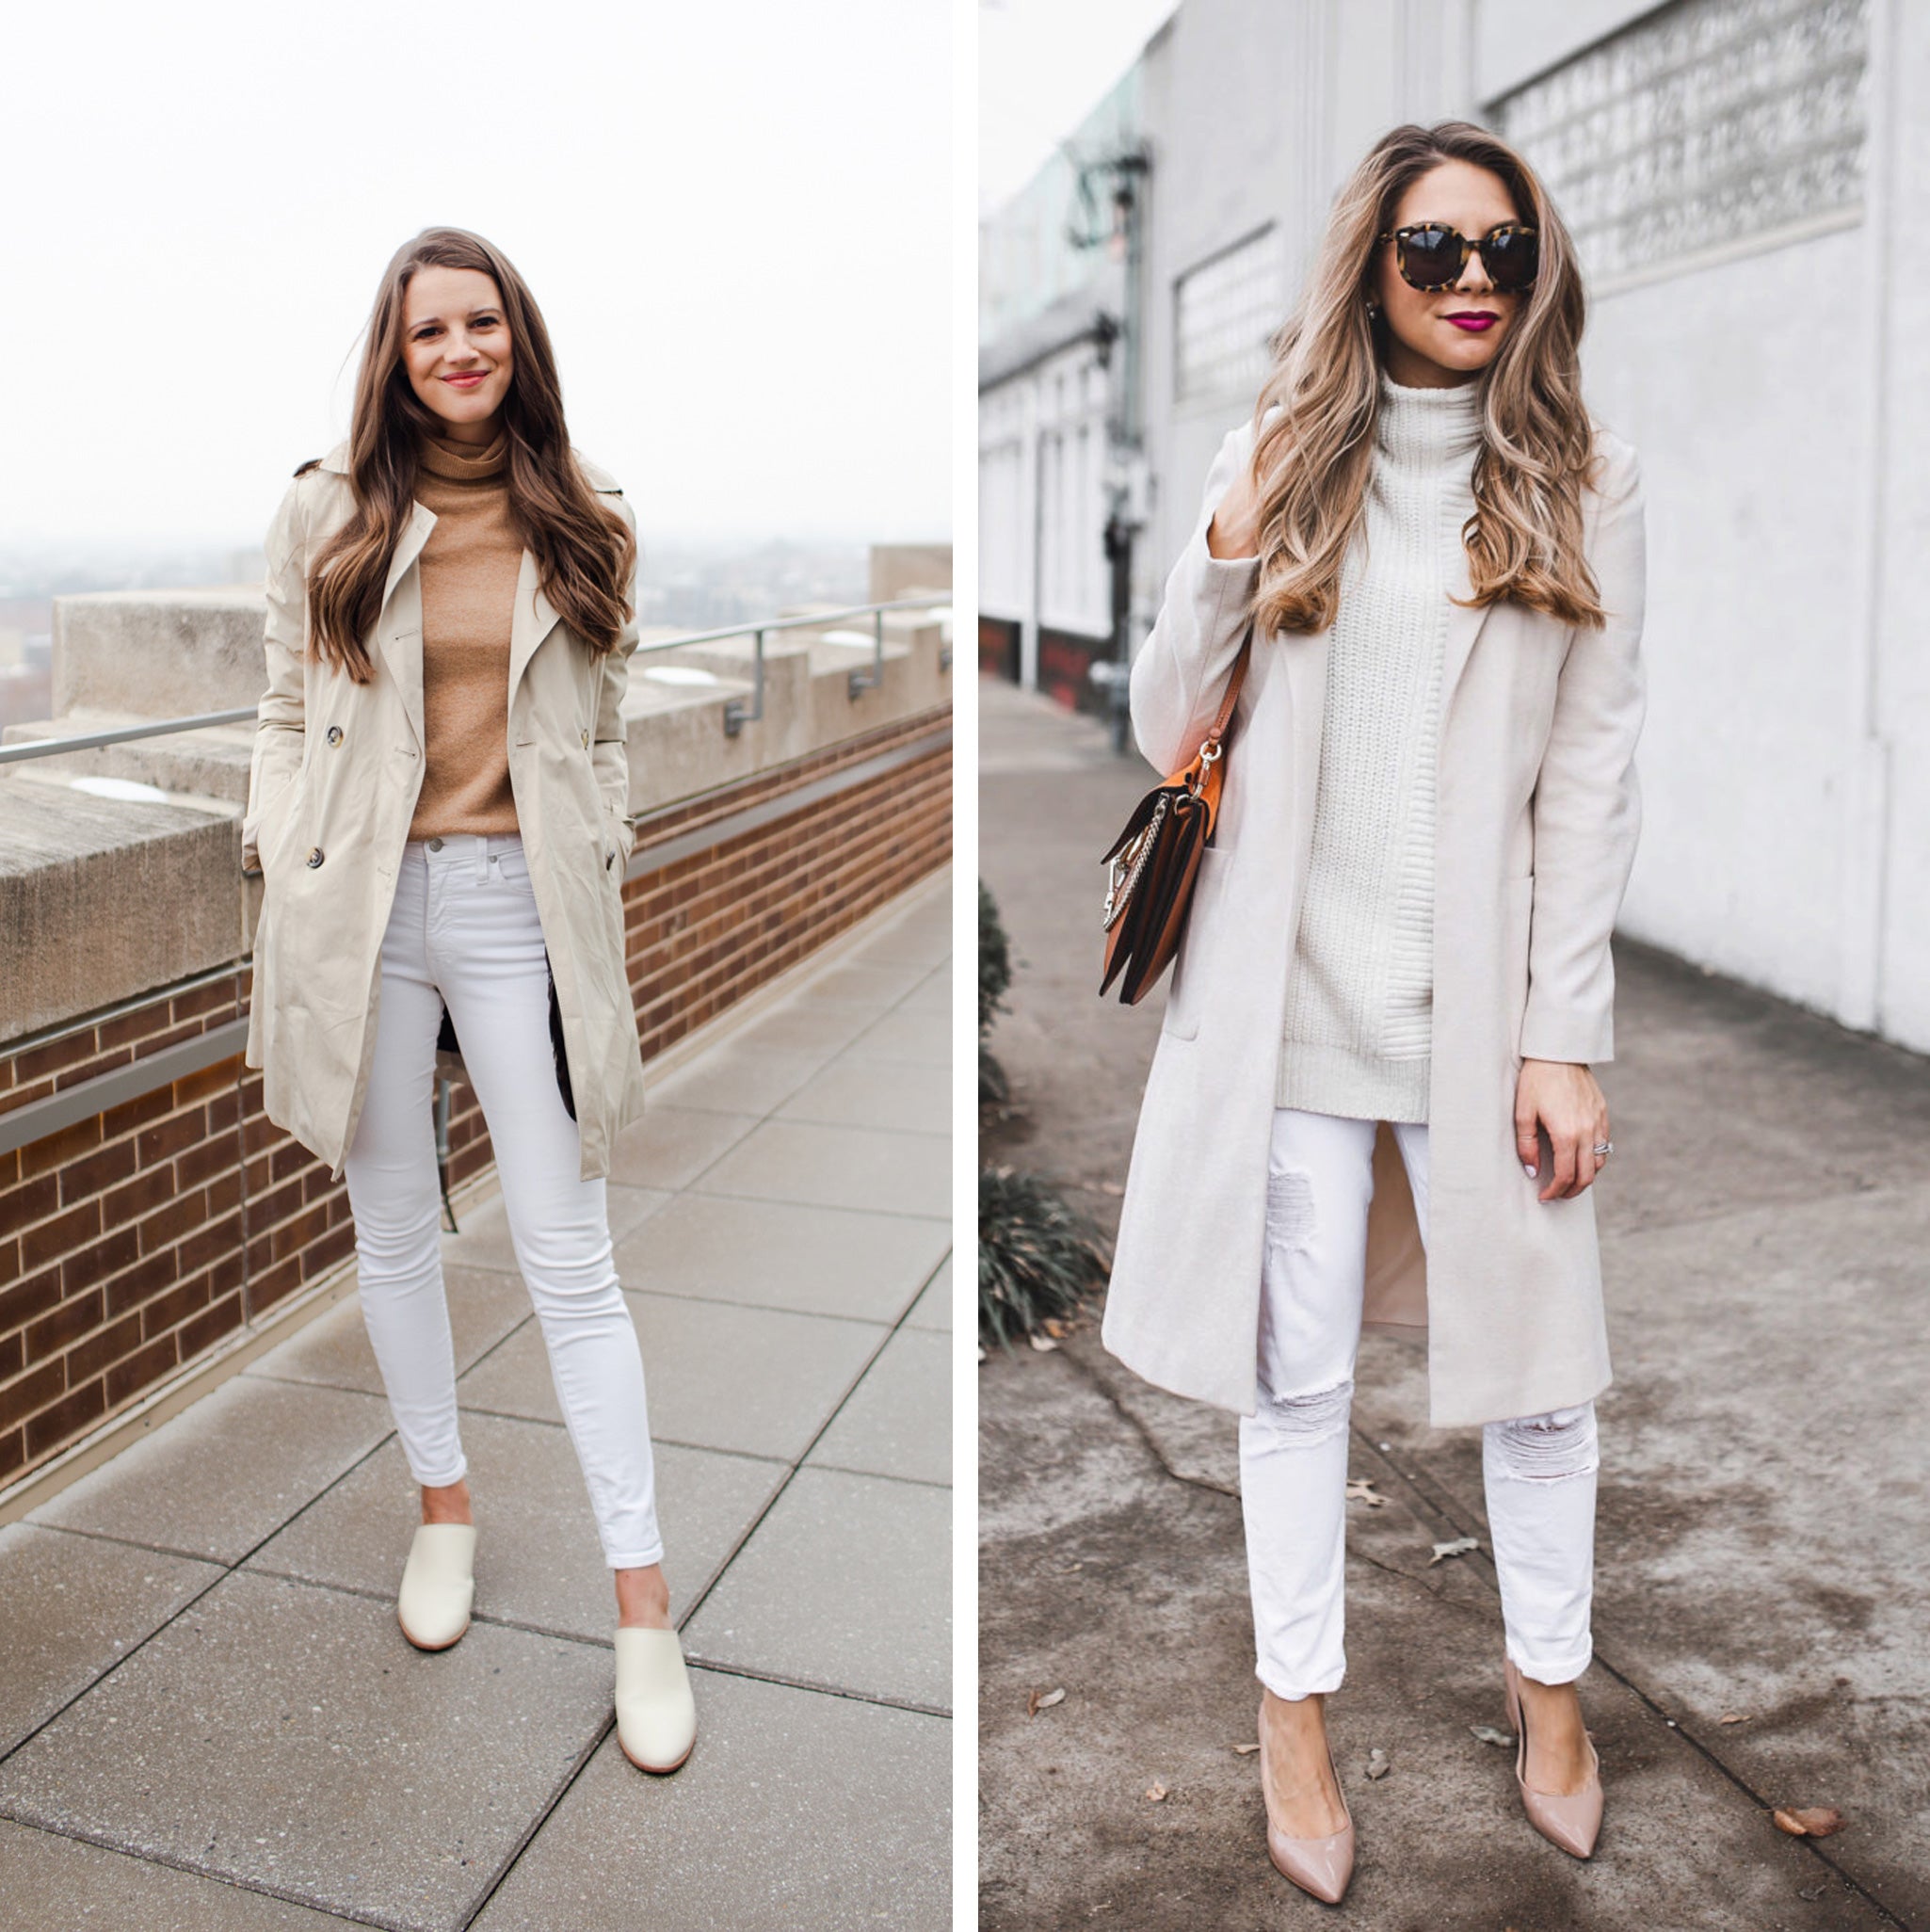 Styling White Jeans in The Winter